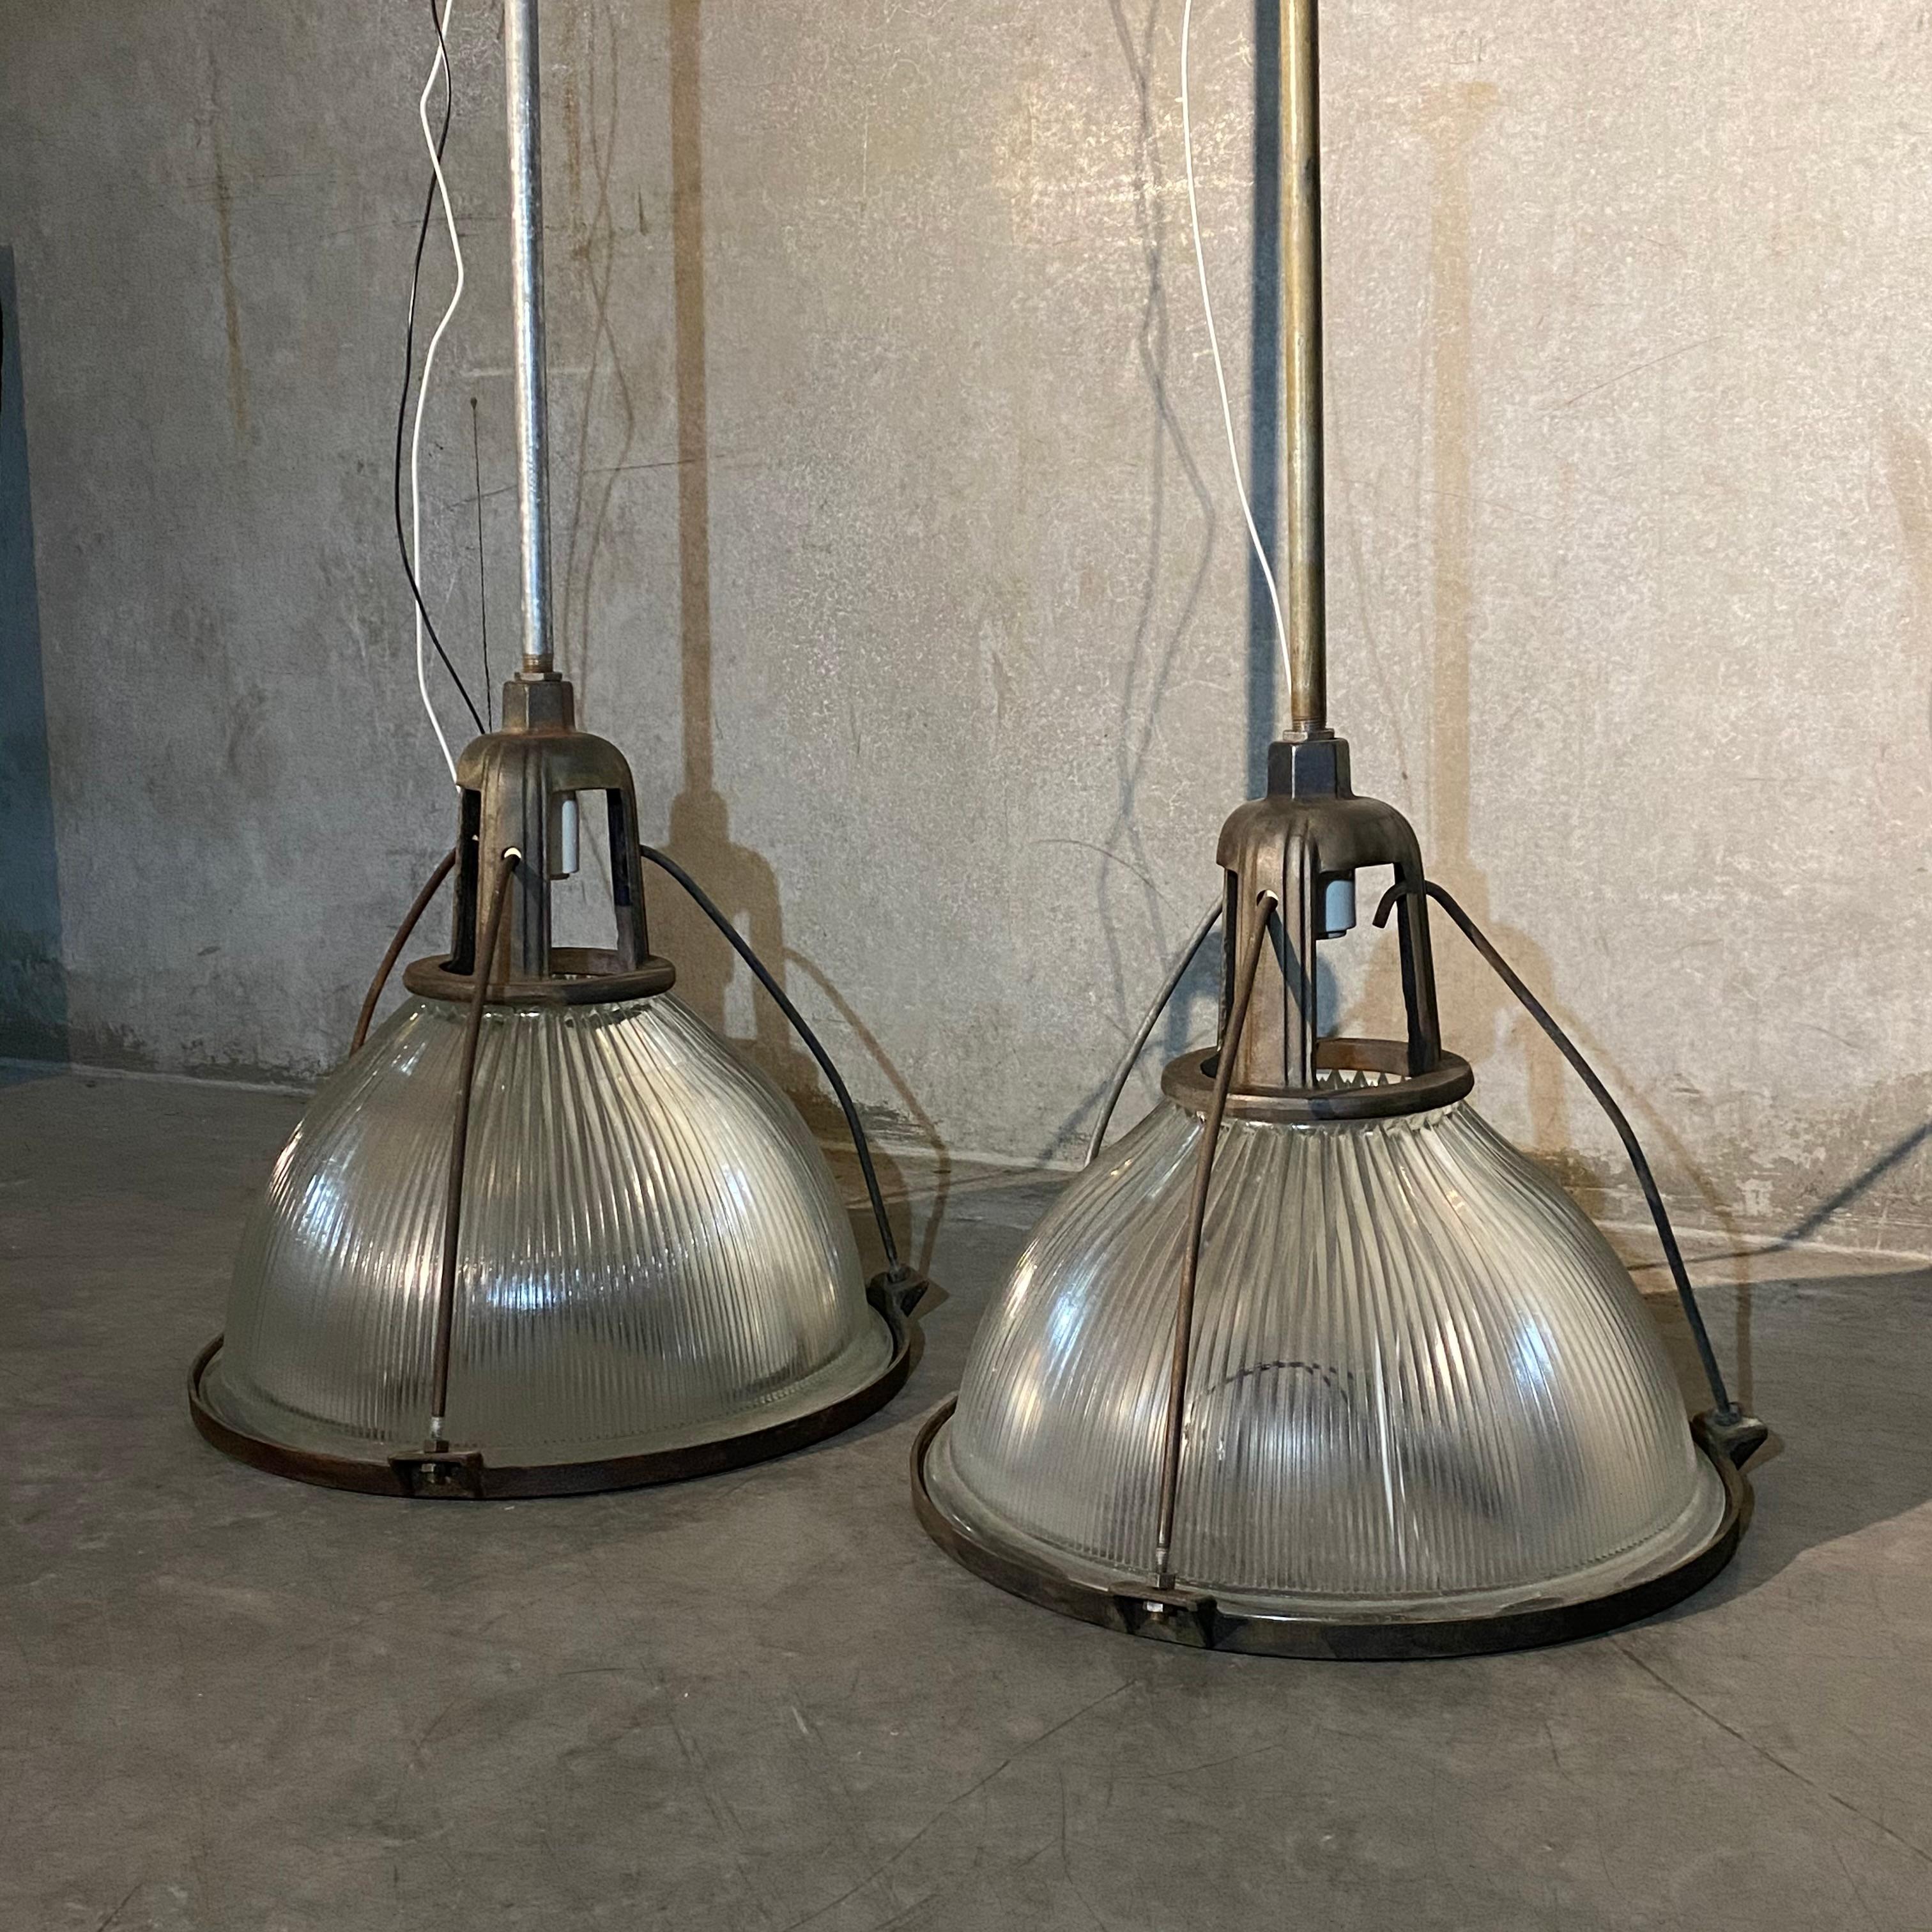 A rare group of three large Holophane lights with first generation cast fitters, ribbed and extra large glass, not many of these out there.

price per light ..

Rewired on pipe with ability to determine height easily.
Set up for easy install.